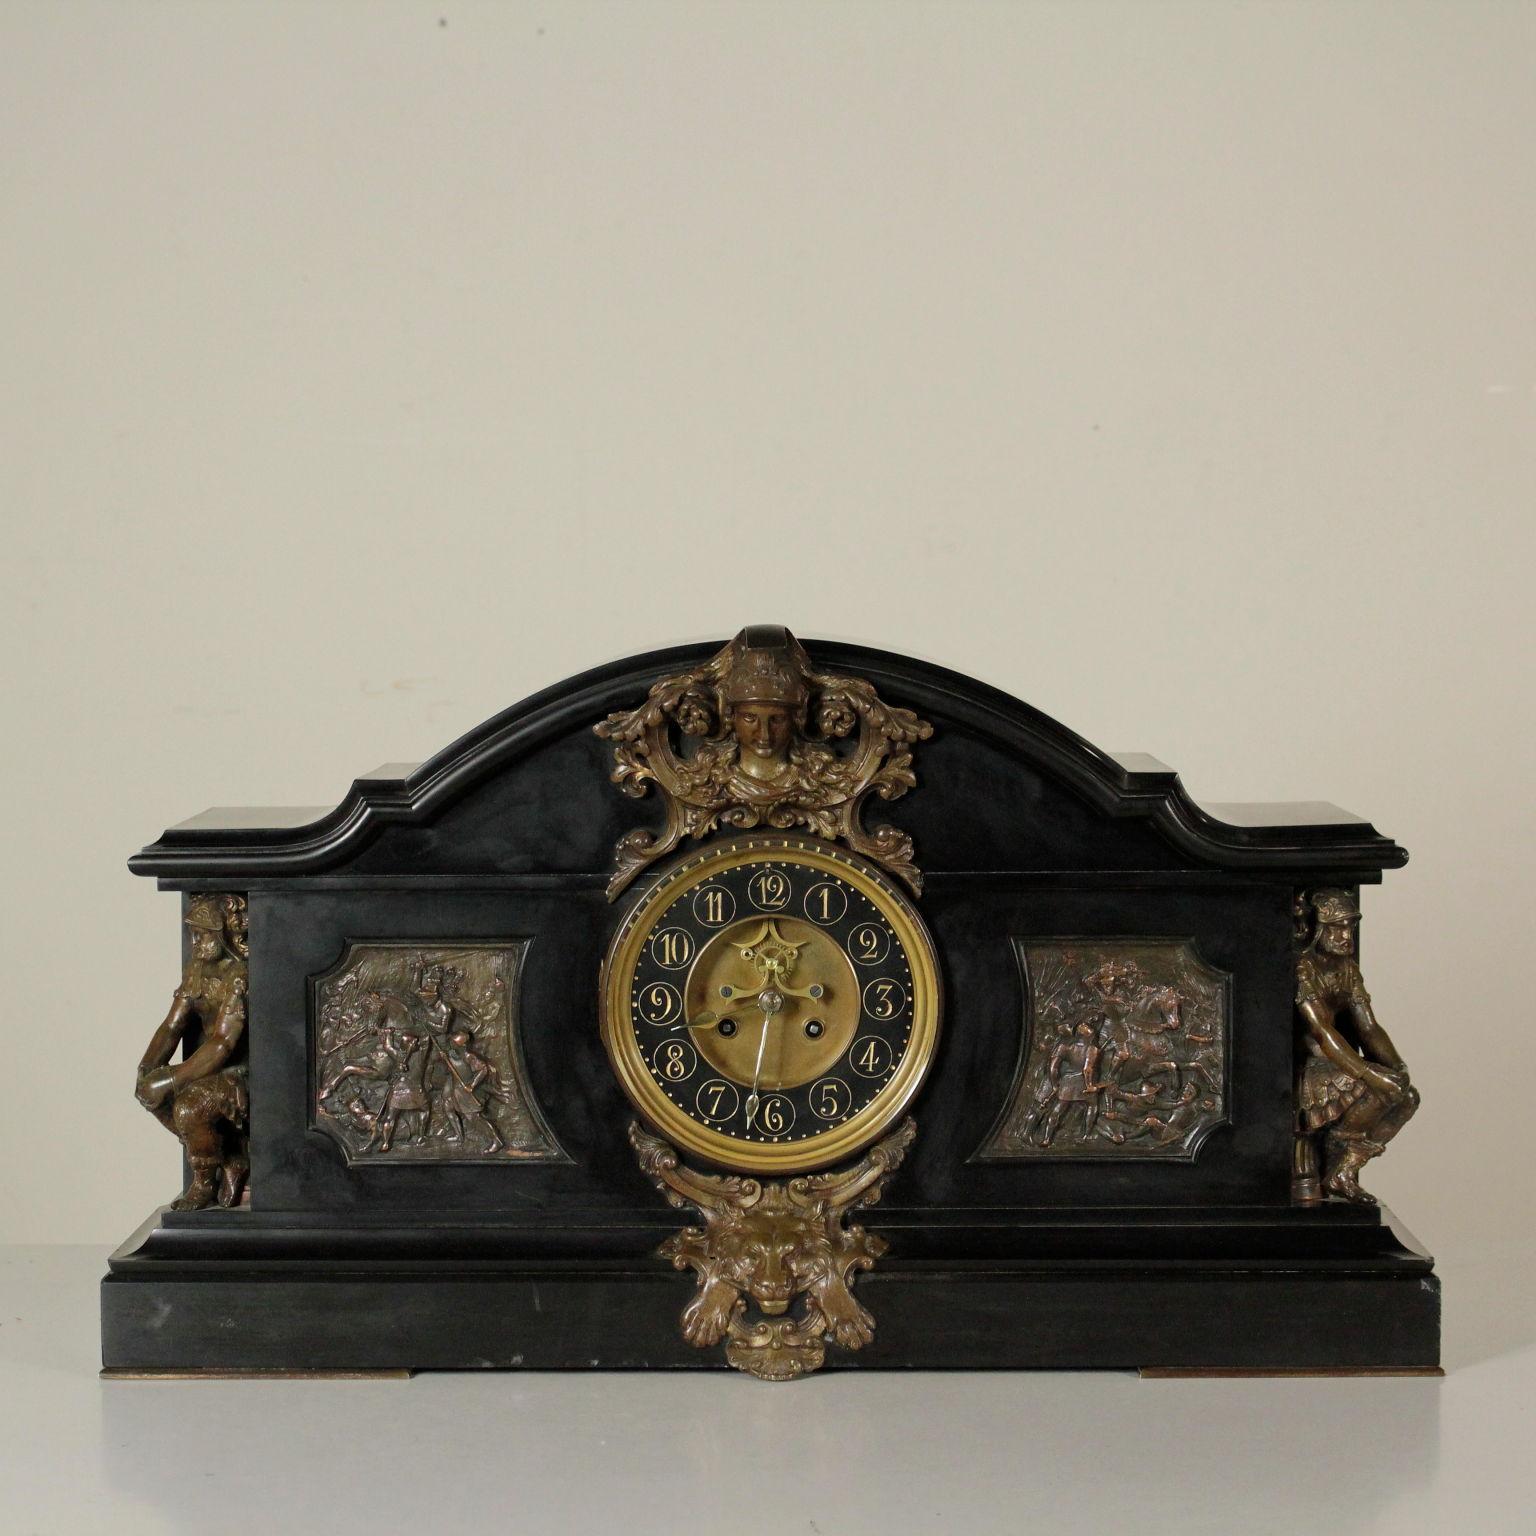 A table clock, black marble with bronze decorations. On the base, a frieze with lion head enclosed in a frame with volutes. On the sides, sculptures depicting soldiers seating on capitals. Battle scenes in low relief. Second dial made of bronze